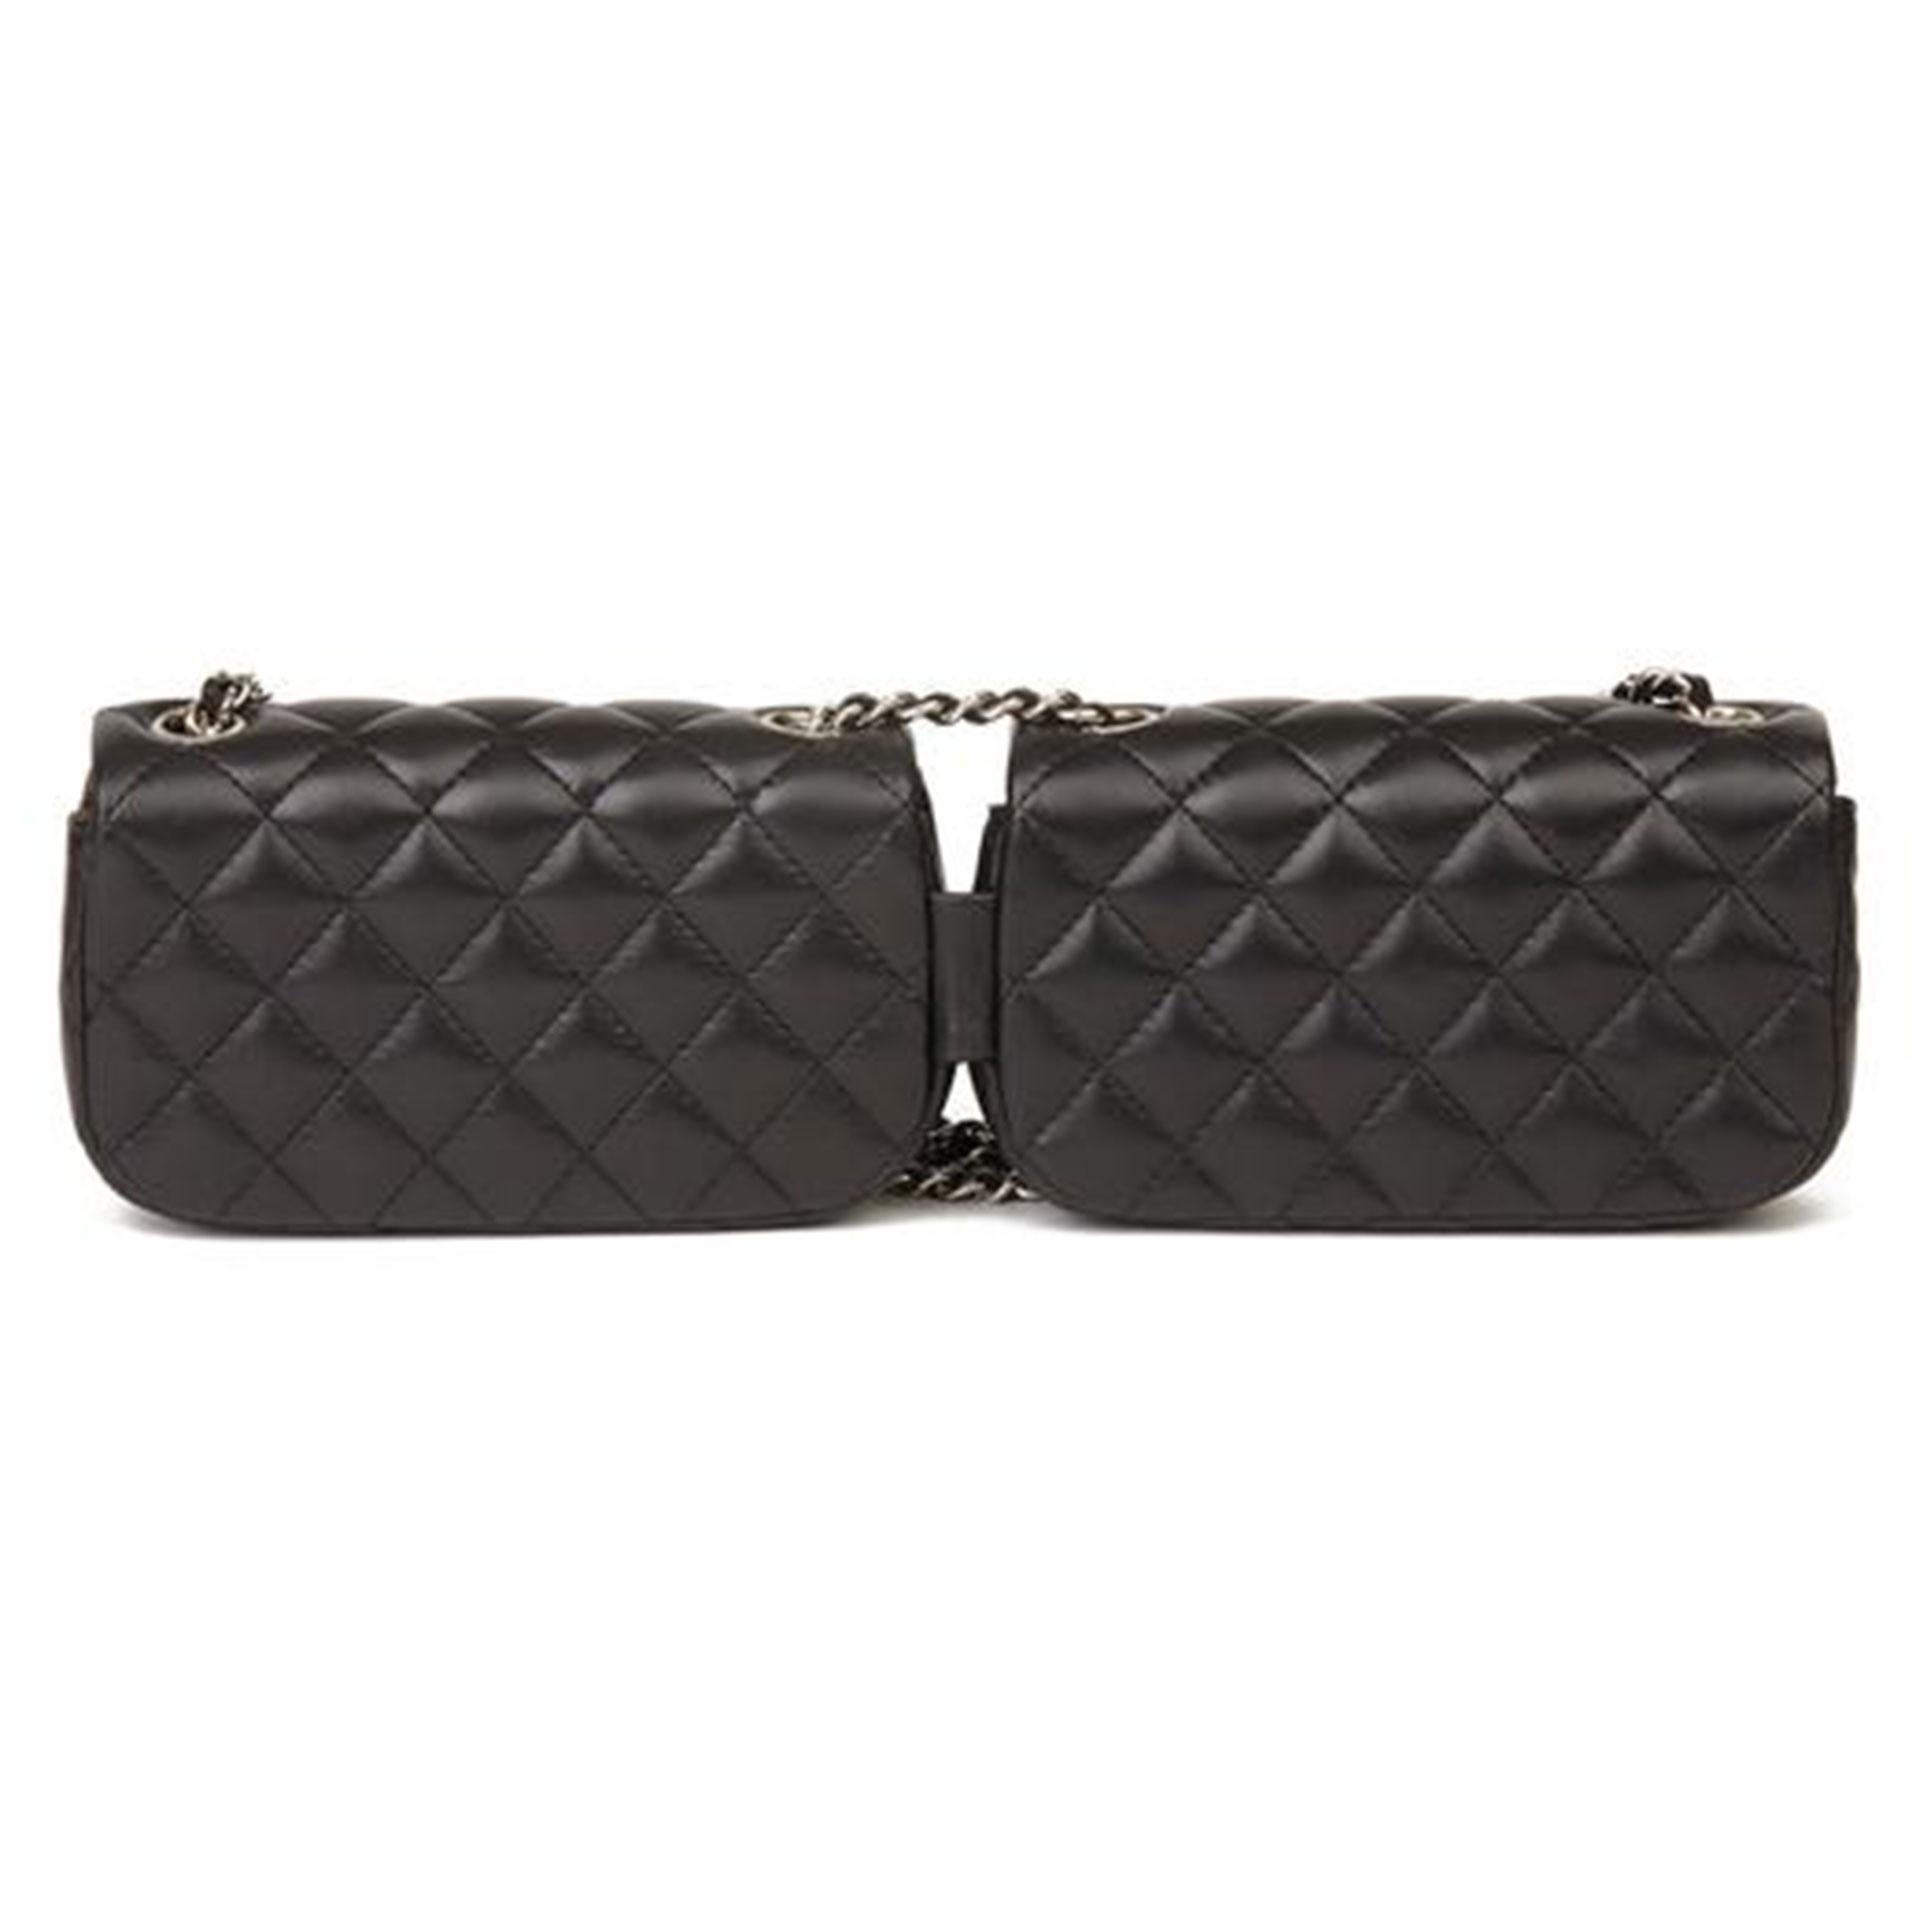 Chanel Side Pack Classic Flap 2.55 Reissue Rare Limited Edition 